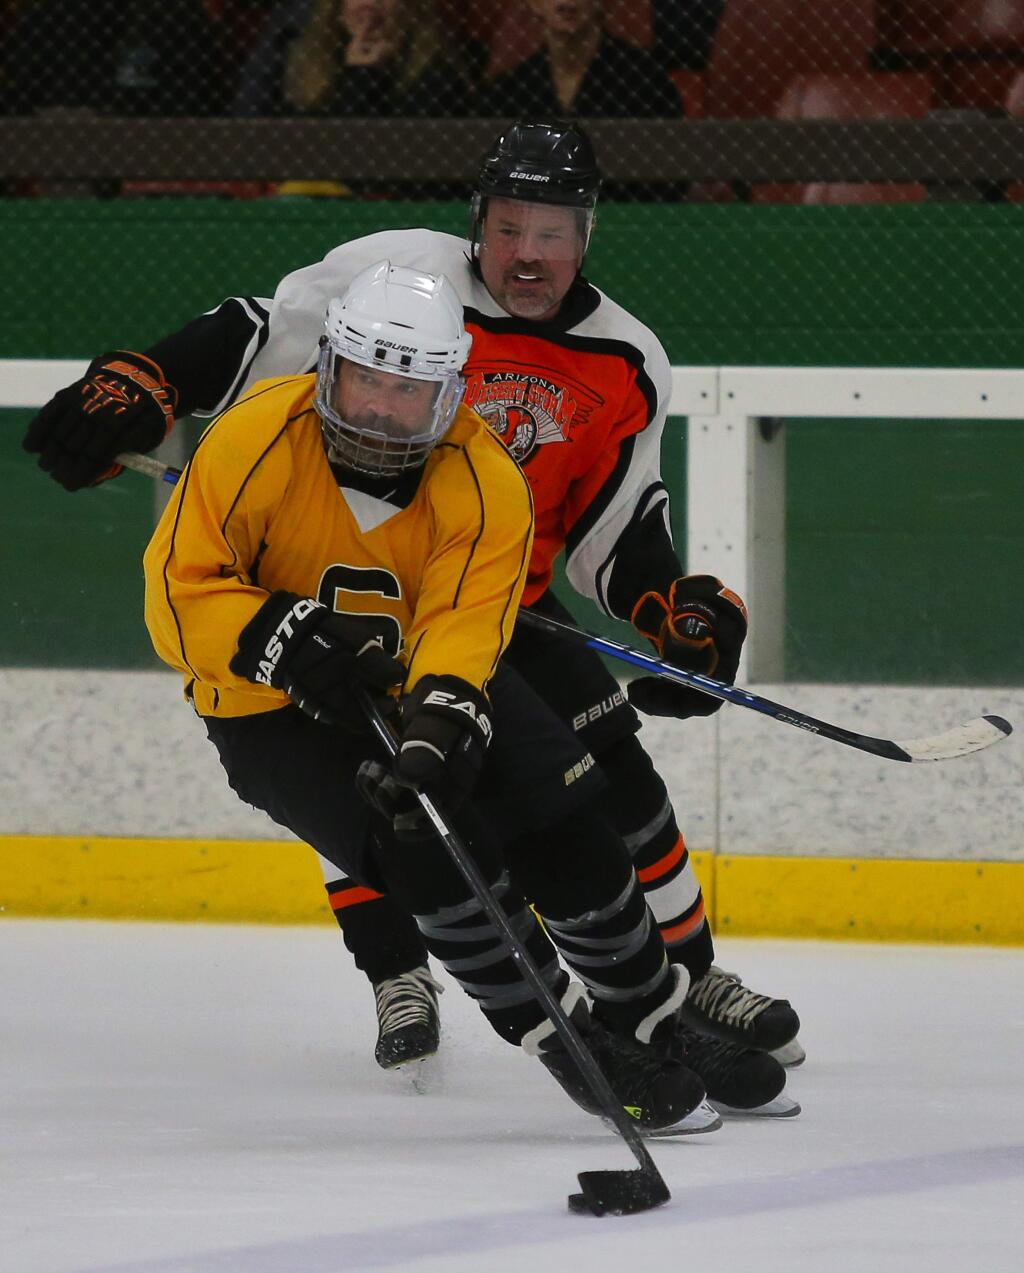 The Bruins' Michael Preiss, foreground, skates away from Arinzona Desert Storm's Mark Atha during Snoopy's Senior World Hockey Tournament at the Redwood Empire Ice Arena in Santa Rosa on Friday, July 21, 2017. (Christopher Chung/ The Press Democrat)